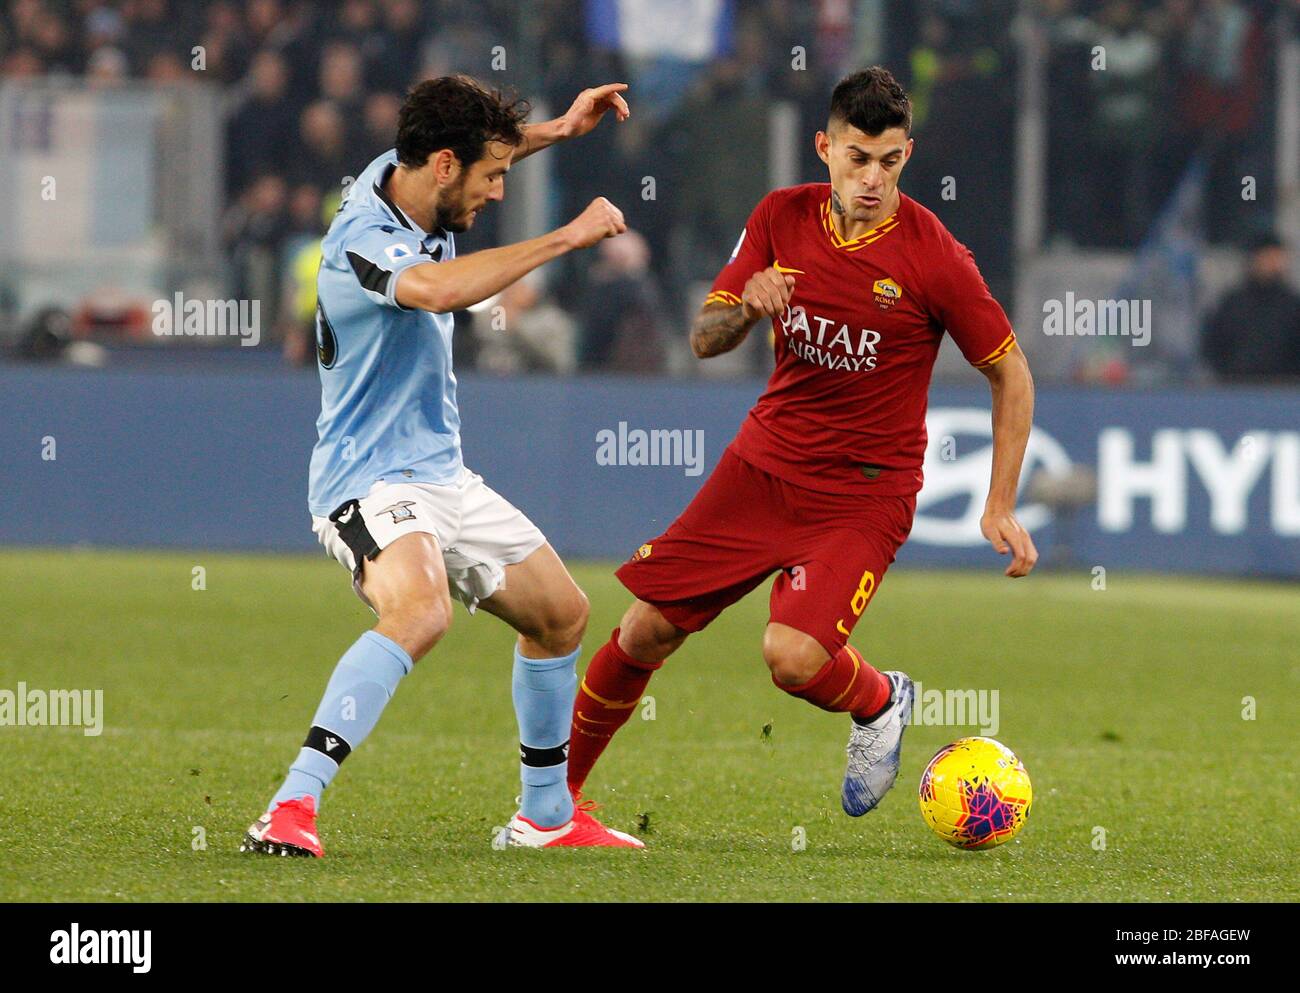 Rome, Italy, January 26, 2020. Roma s Diego Perotti, right, is challenged by Lazio s Marco Parolo during the Serie A soccer match between Roma and Lazio at the Olympic Stadium. Stock Photo